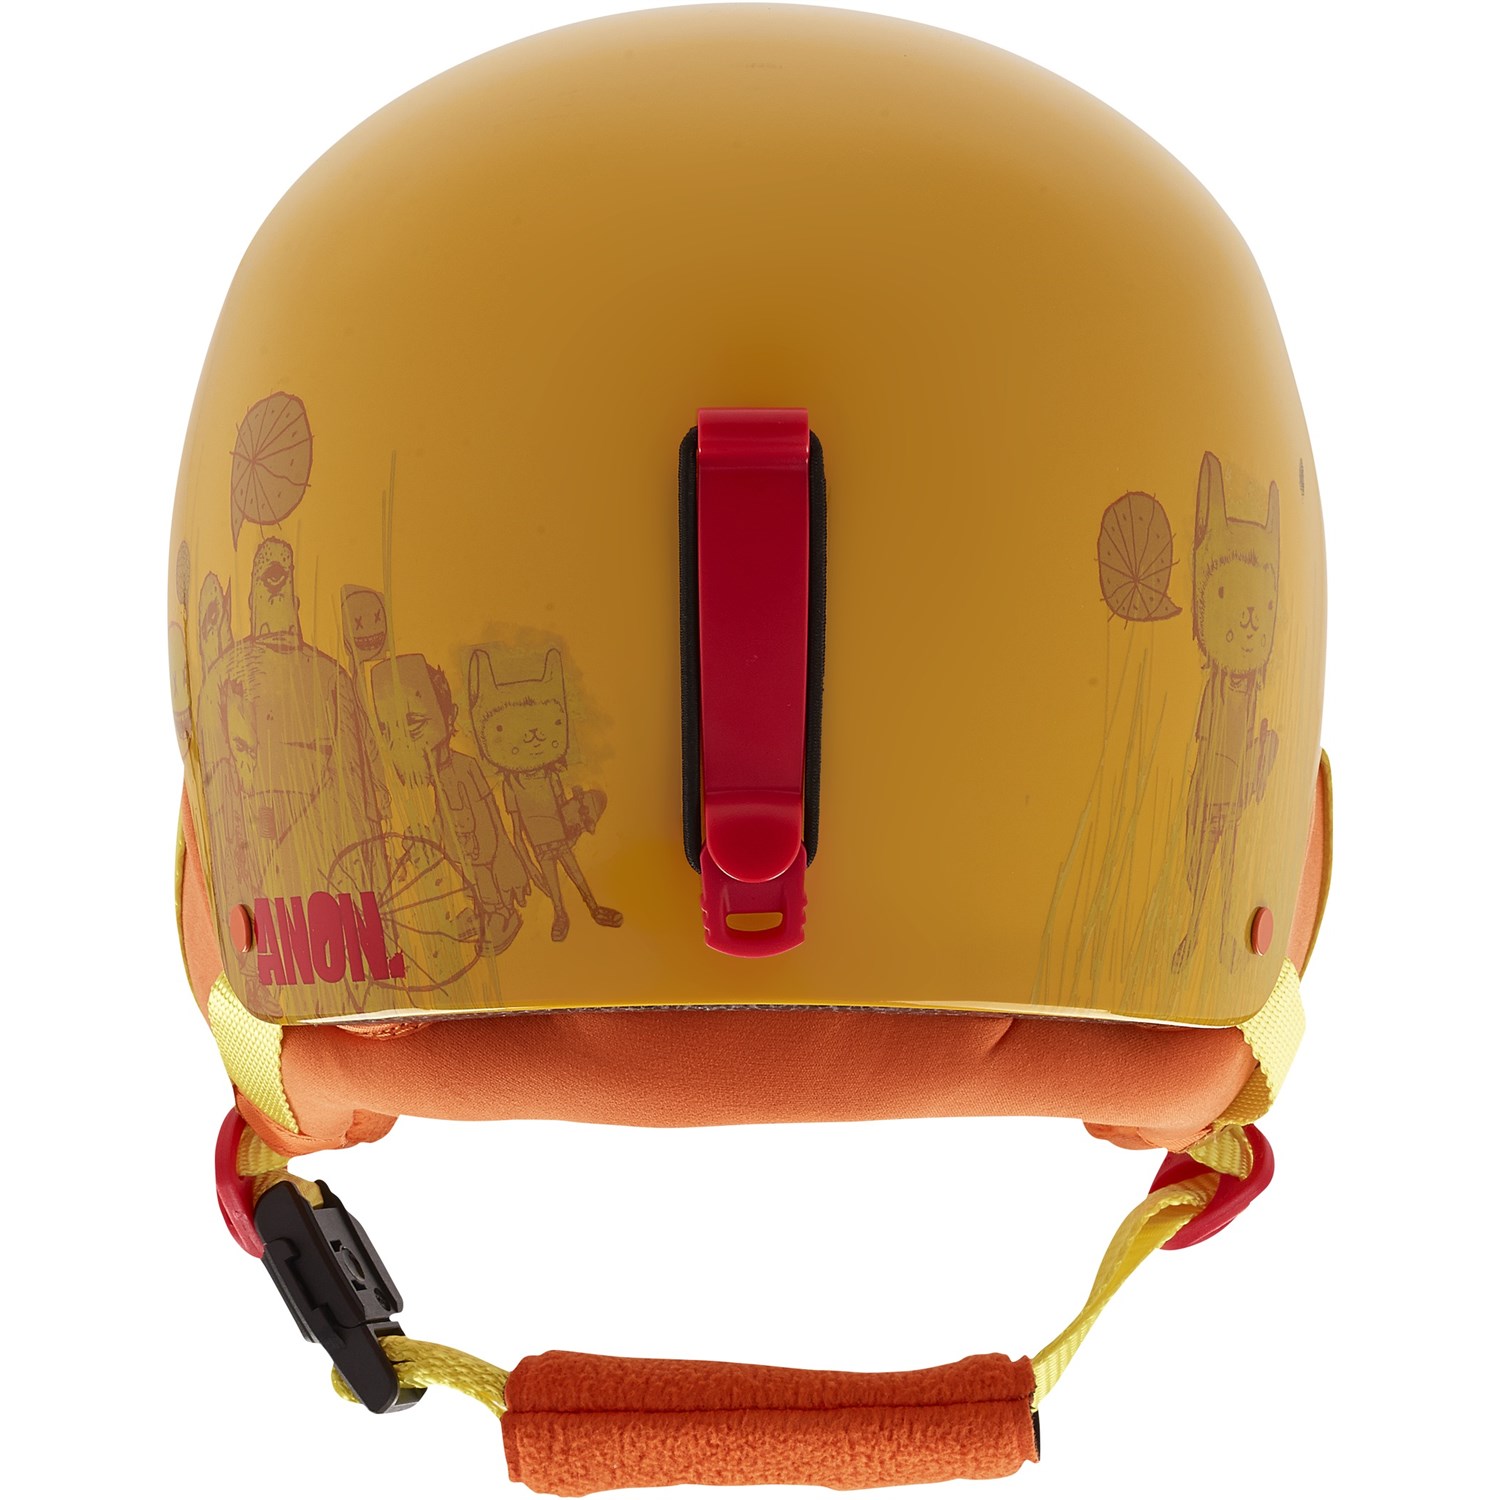 Anon Youth Scout Helmet 